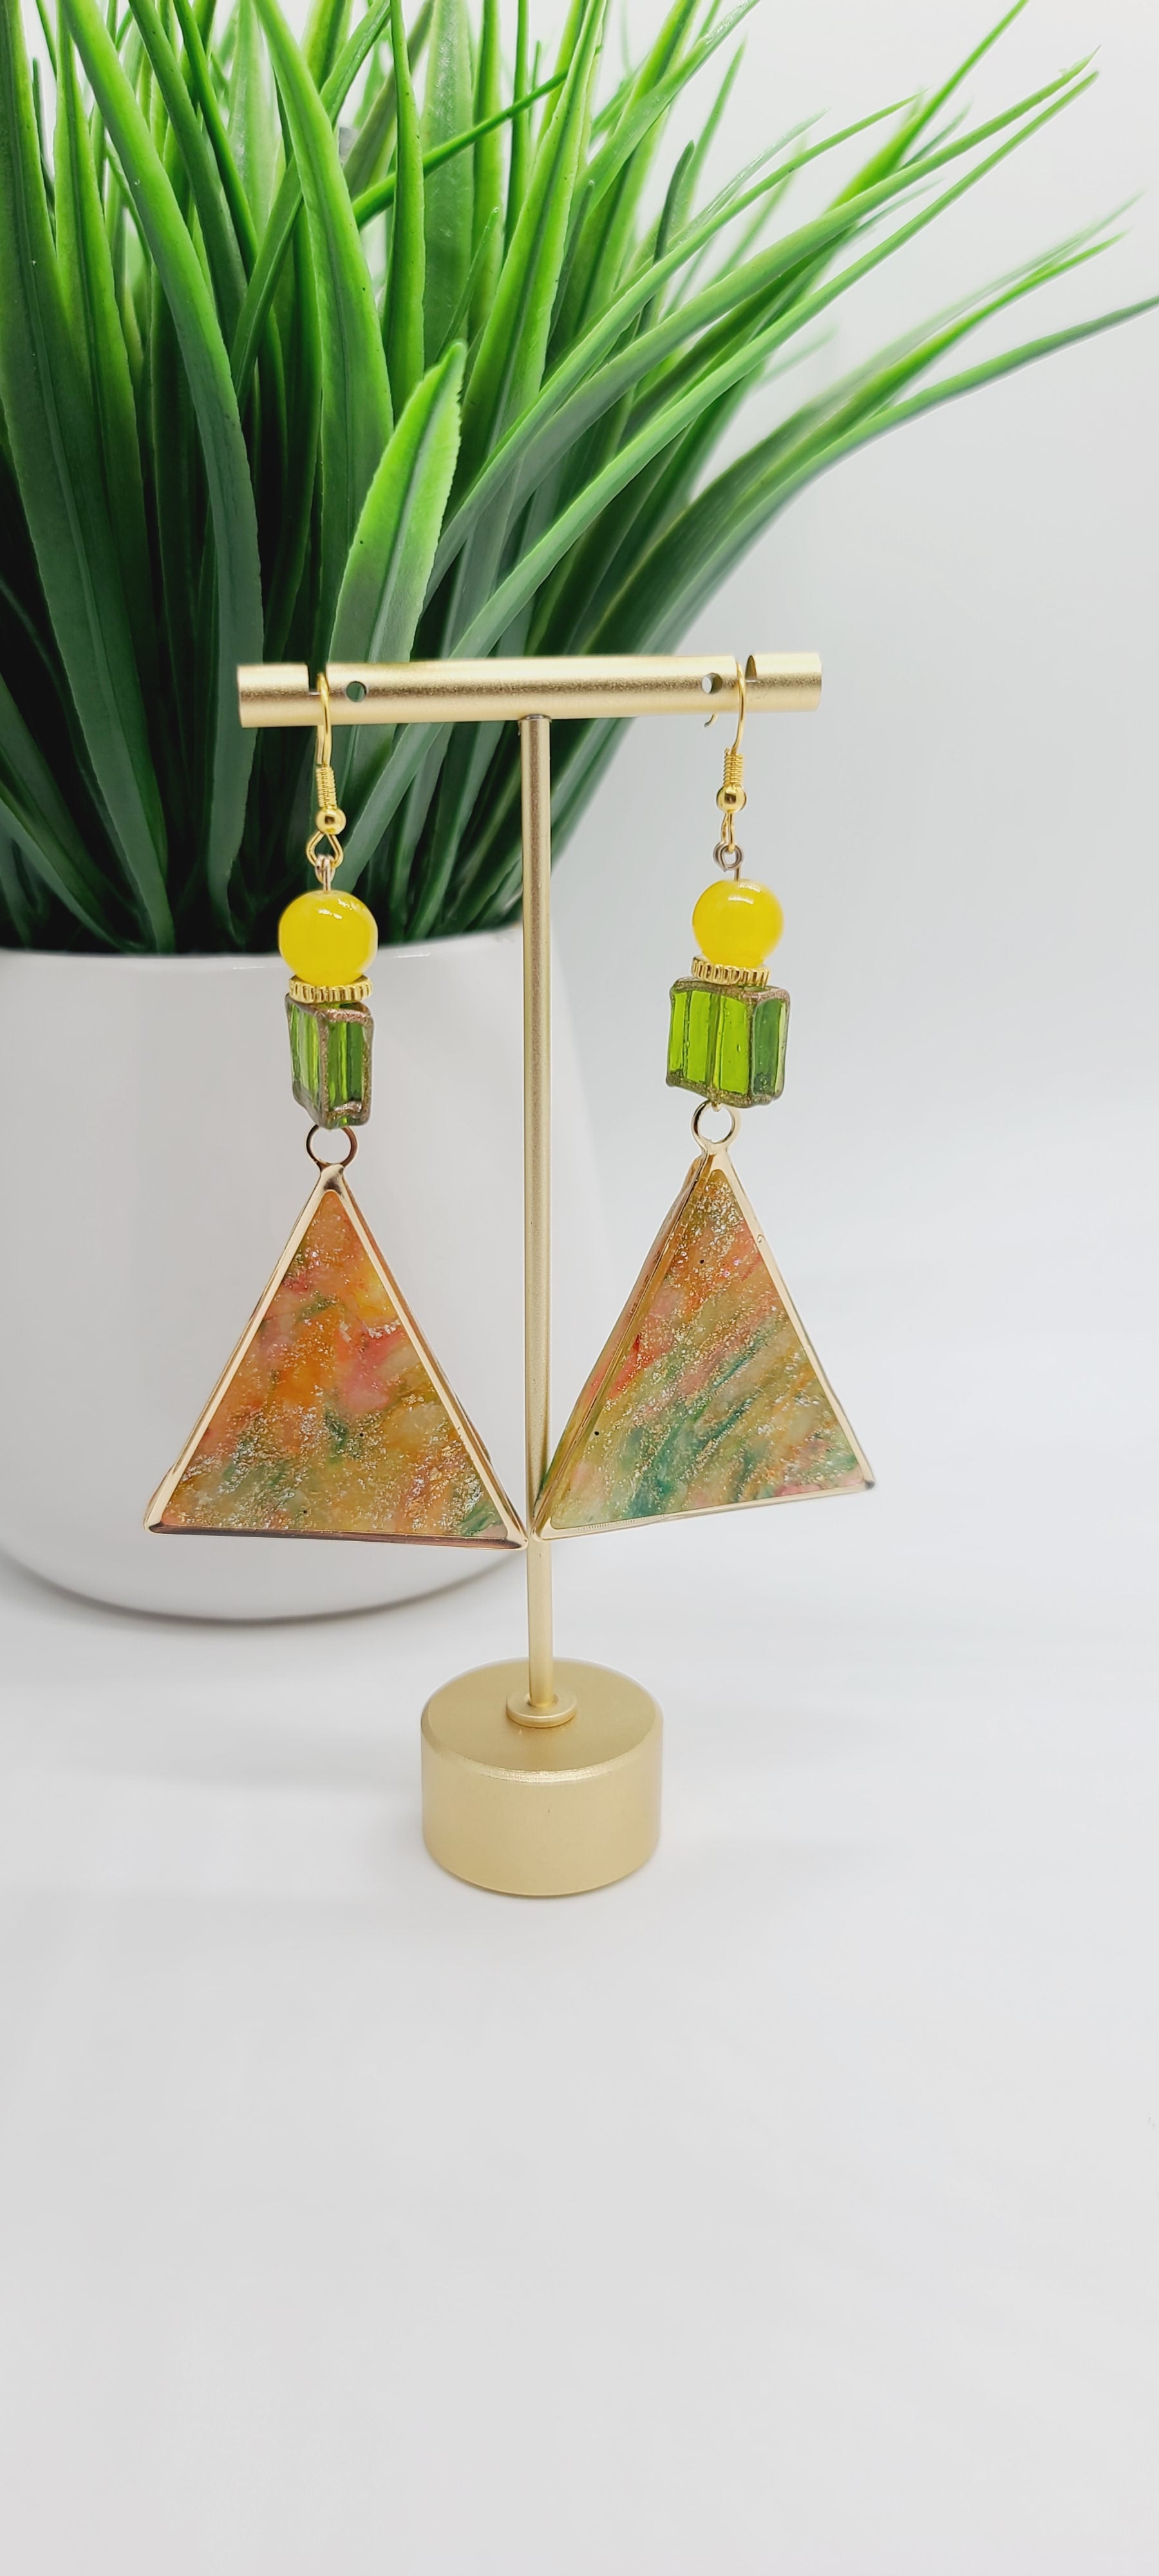 Length: 3.75 inches | Weight: 0.8 ounces  Distinctly You! These earrings are made with gold triangle frames with inlaid polymer clay in orange gold green with gold flakes, 10mm yellow glass beads, gold trim green glass box beads, and gold rondelles.